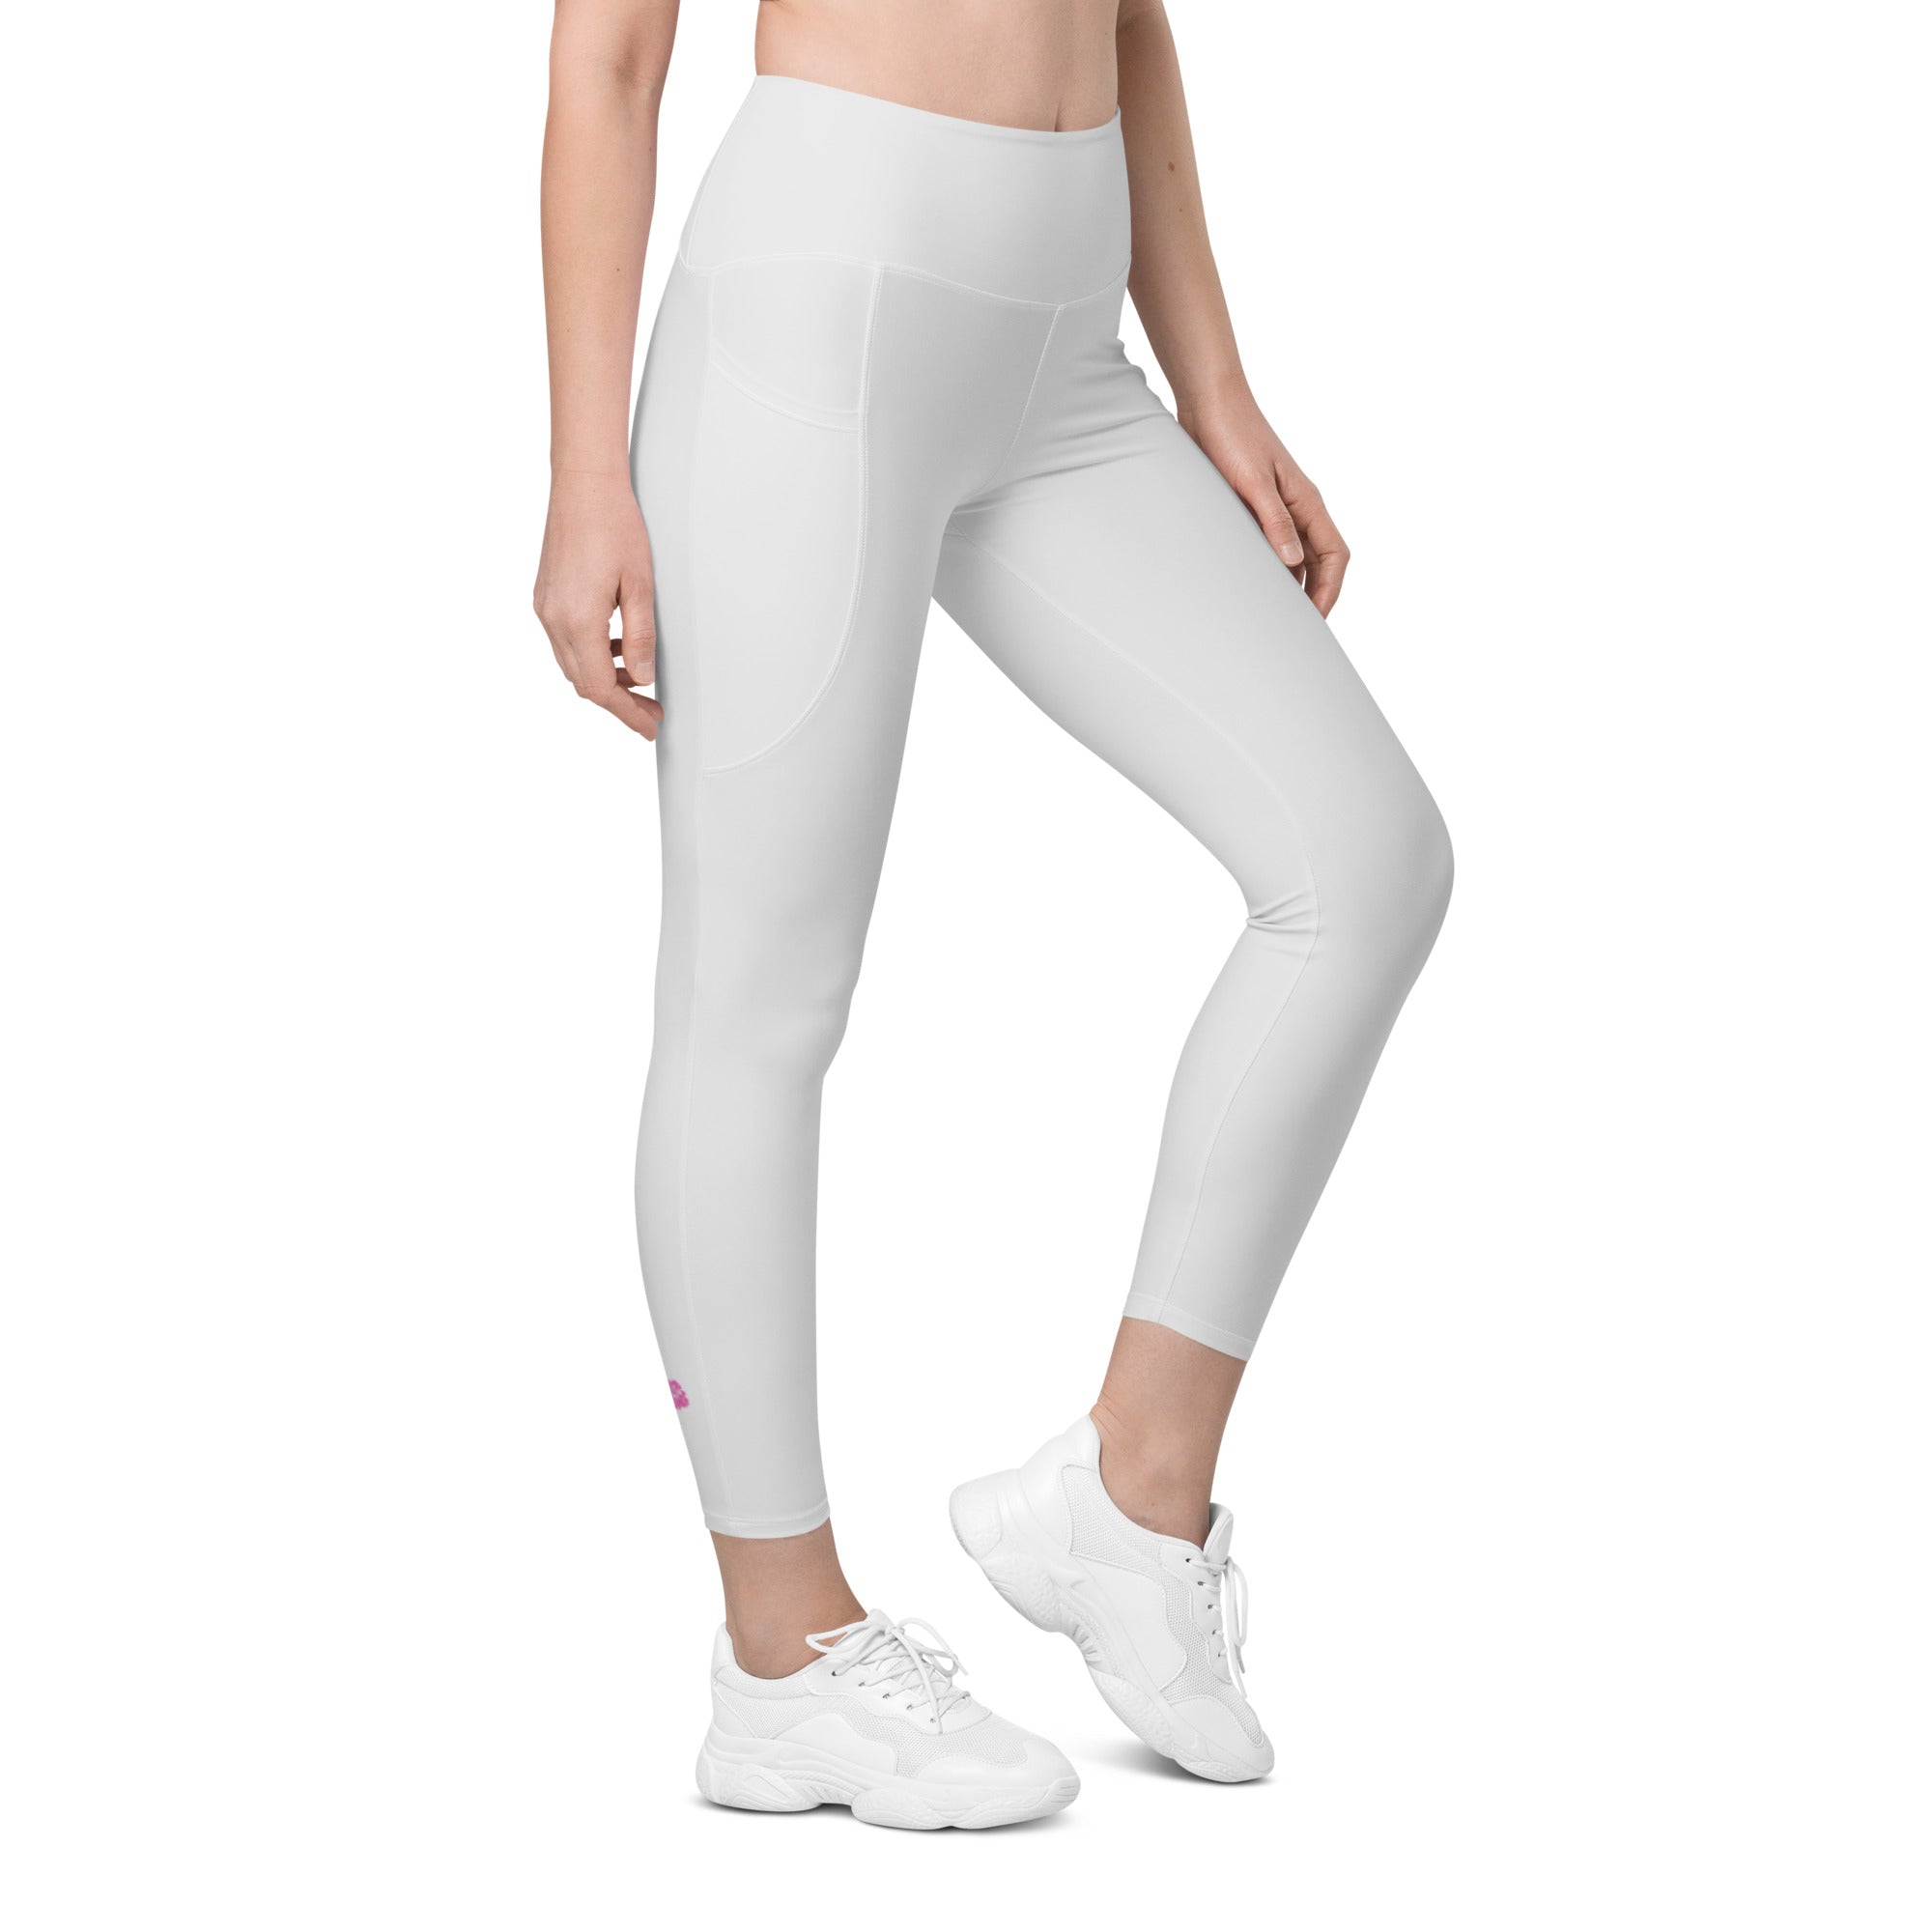 Buy grey colour leggings for girls in India @ Limeroad